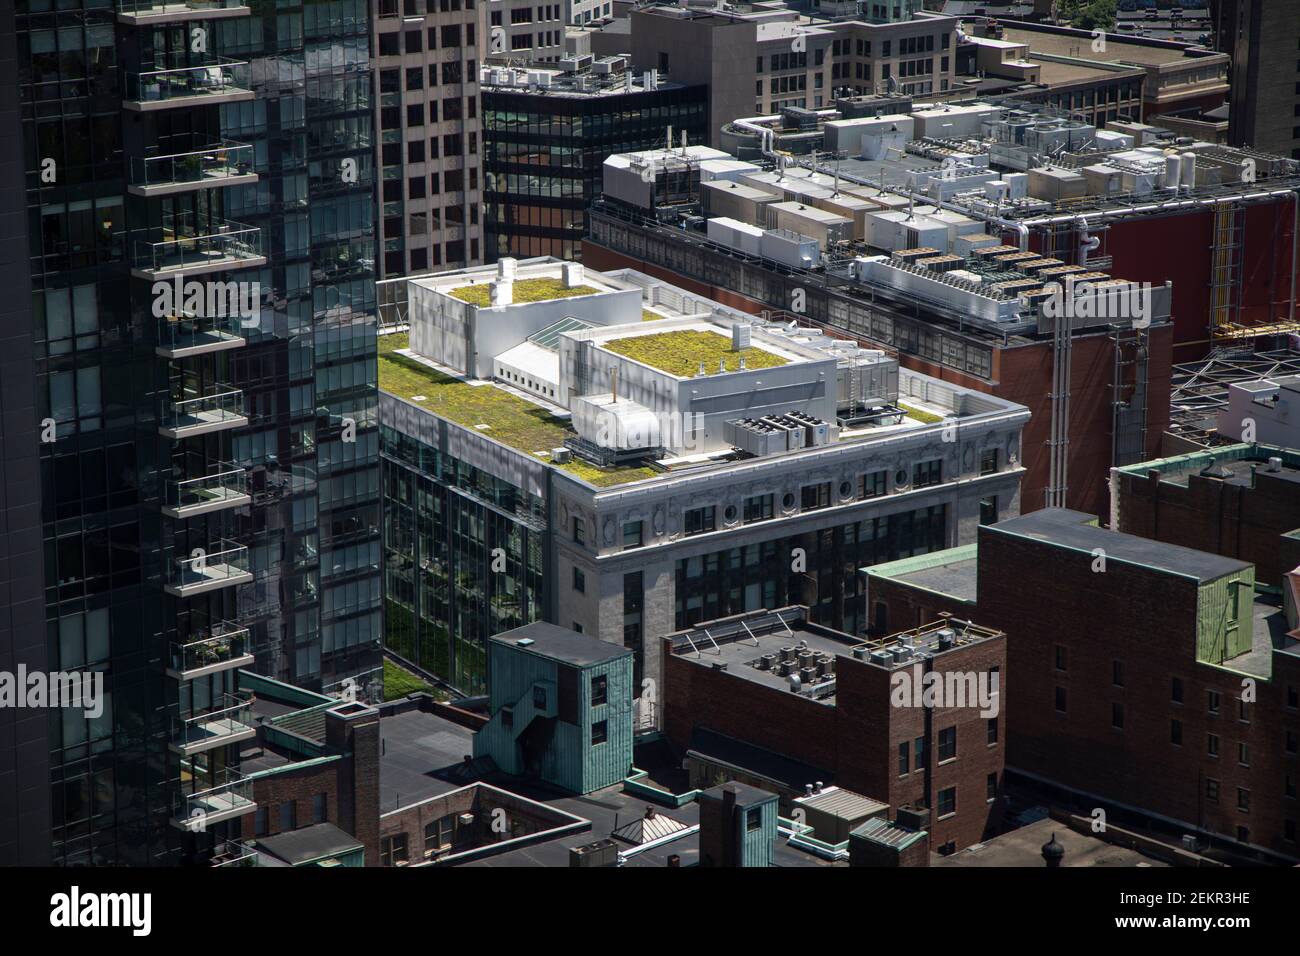 An aerial view of a green rooftop terrace in an urban environment Boston Massachusetts Stock Photo